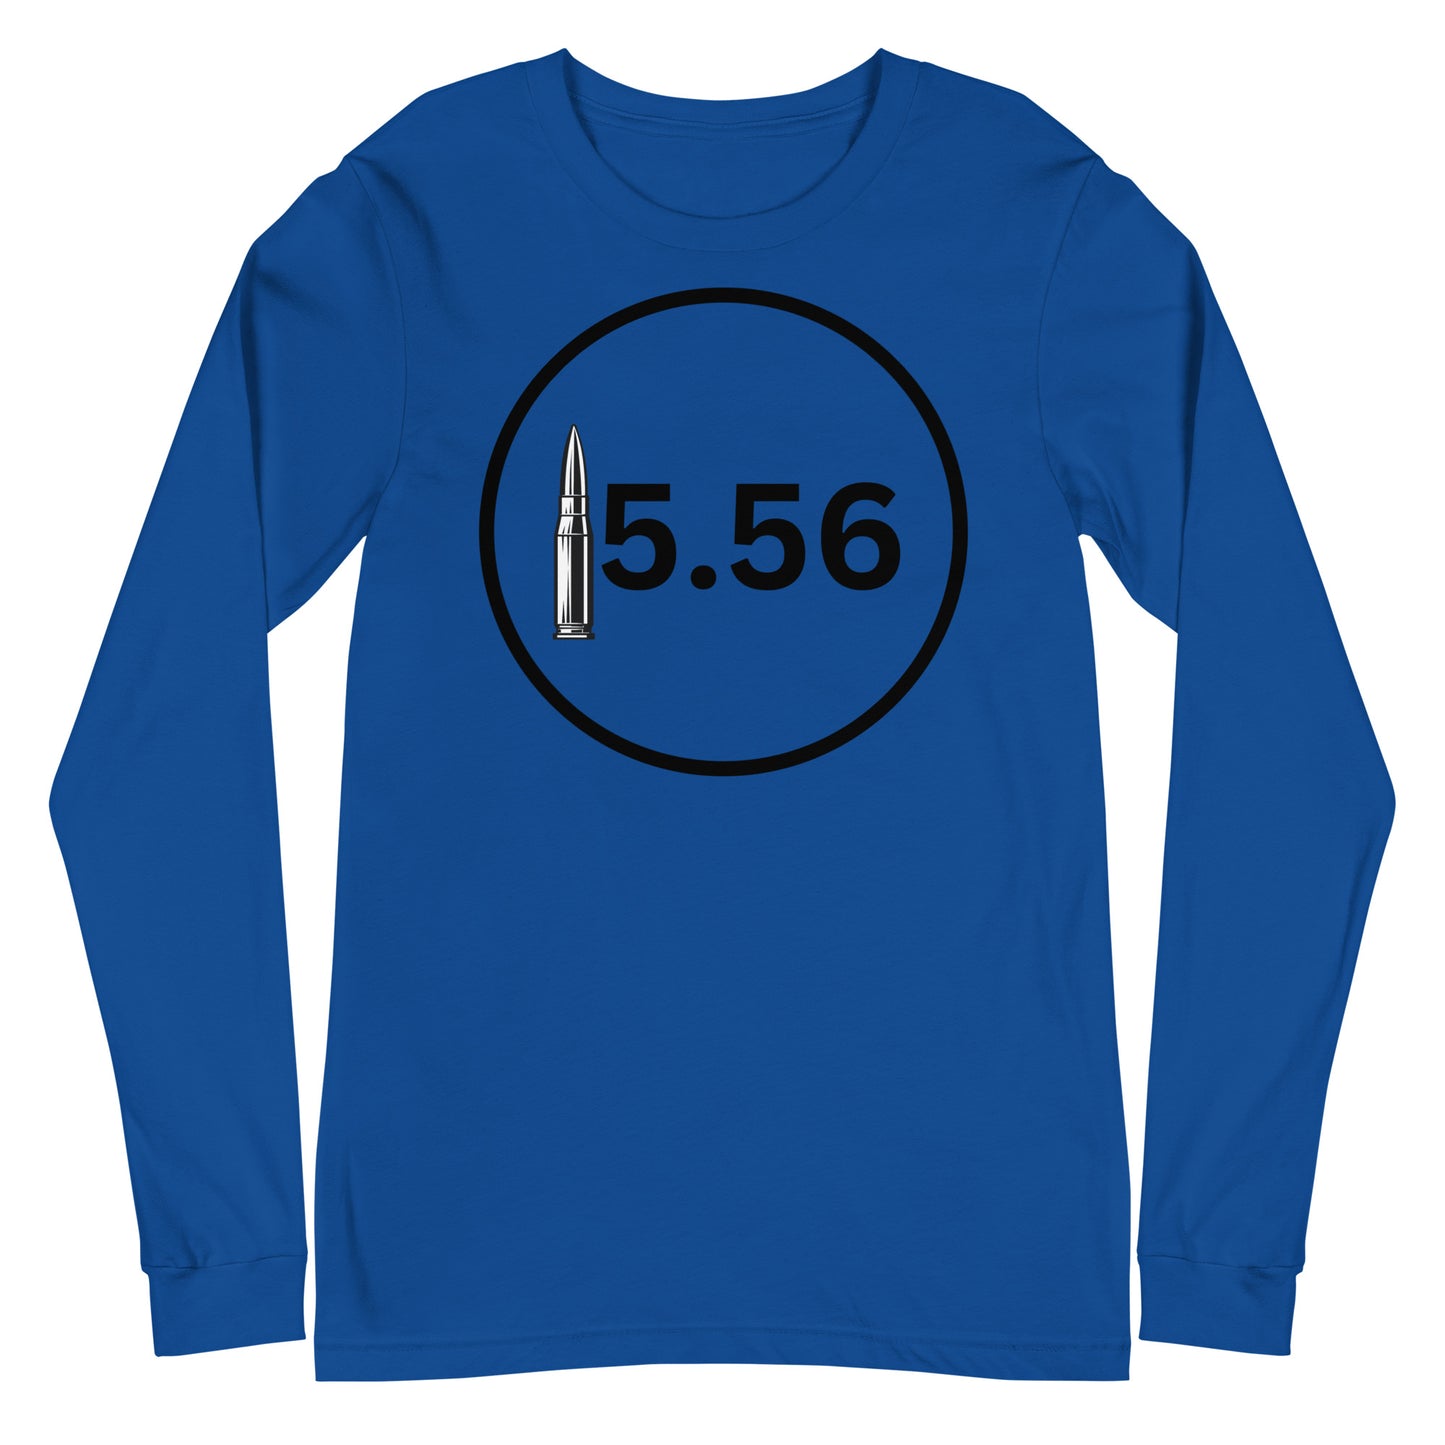 "Patriotic 5.56 Blue Long Sleeve T-shirt featuring the caliber '5.56' and American flag design."